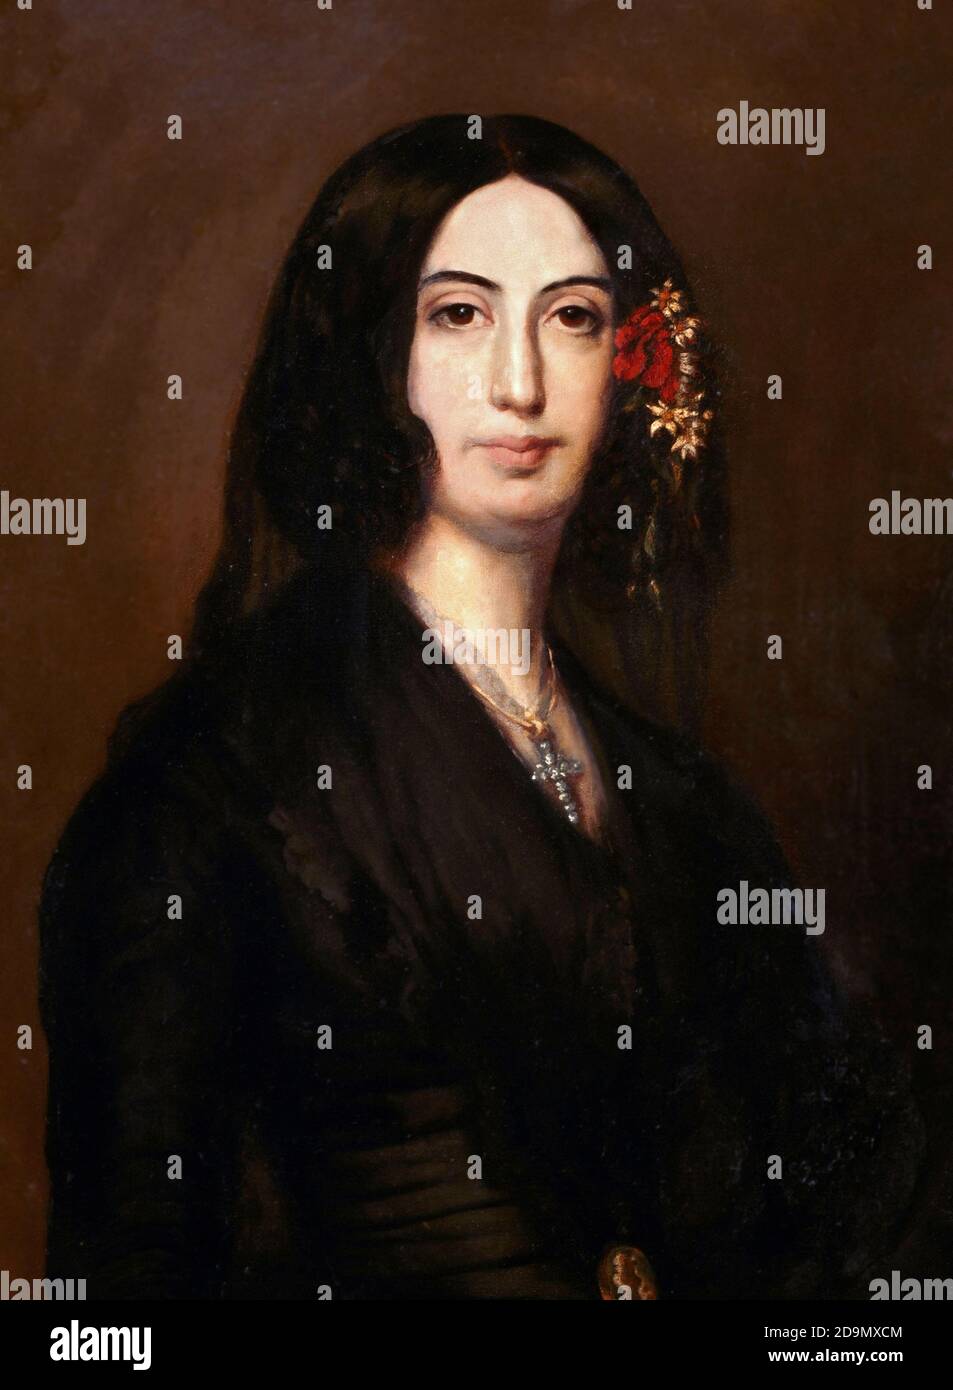 George Sand, portrait after Auguste Charpentier, c. 1838. The French writer, George Sand (Amantine-Lucile-Aurore Dupin: 1804-1876) was famous for her affair with the composer Frederic Chopin. Stock Photo